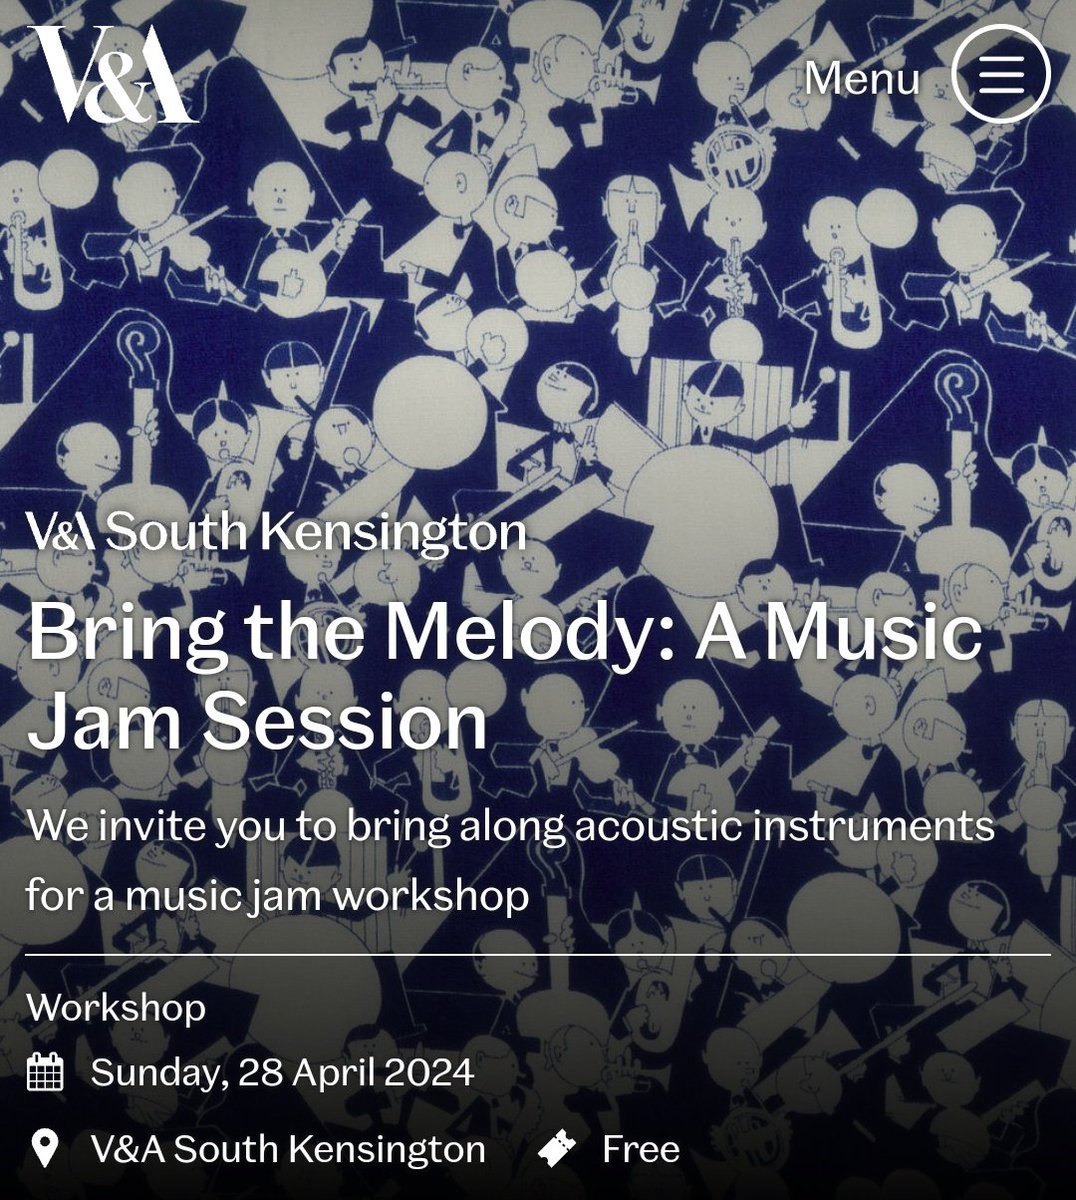 Sun 28 April: Bring the Melody: A Music Jam Session. We invite you to bring along acoustic instruments for a music jam workshop. vam.ac.uk/event/4jwgmkL1…